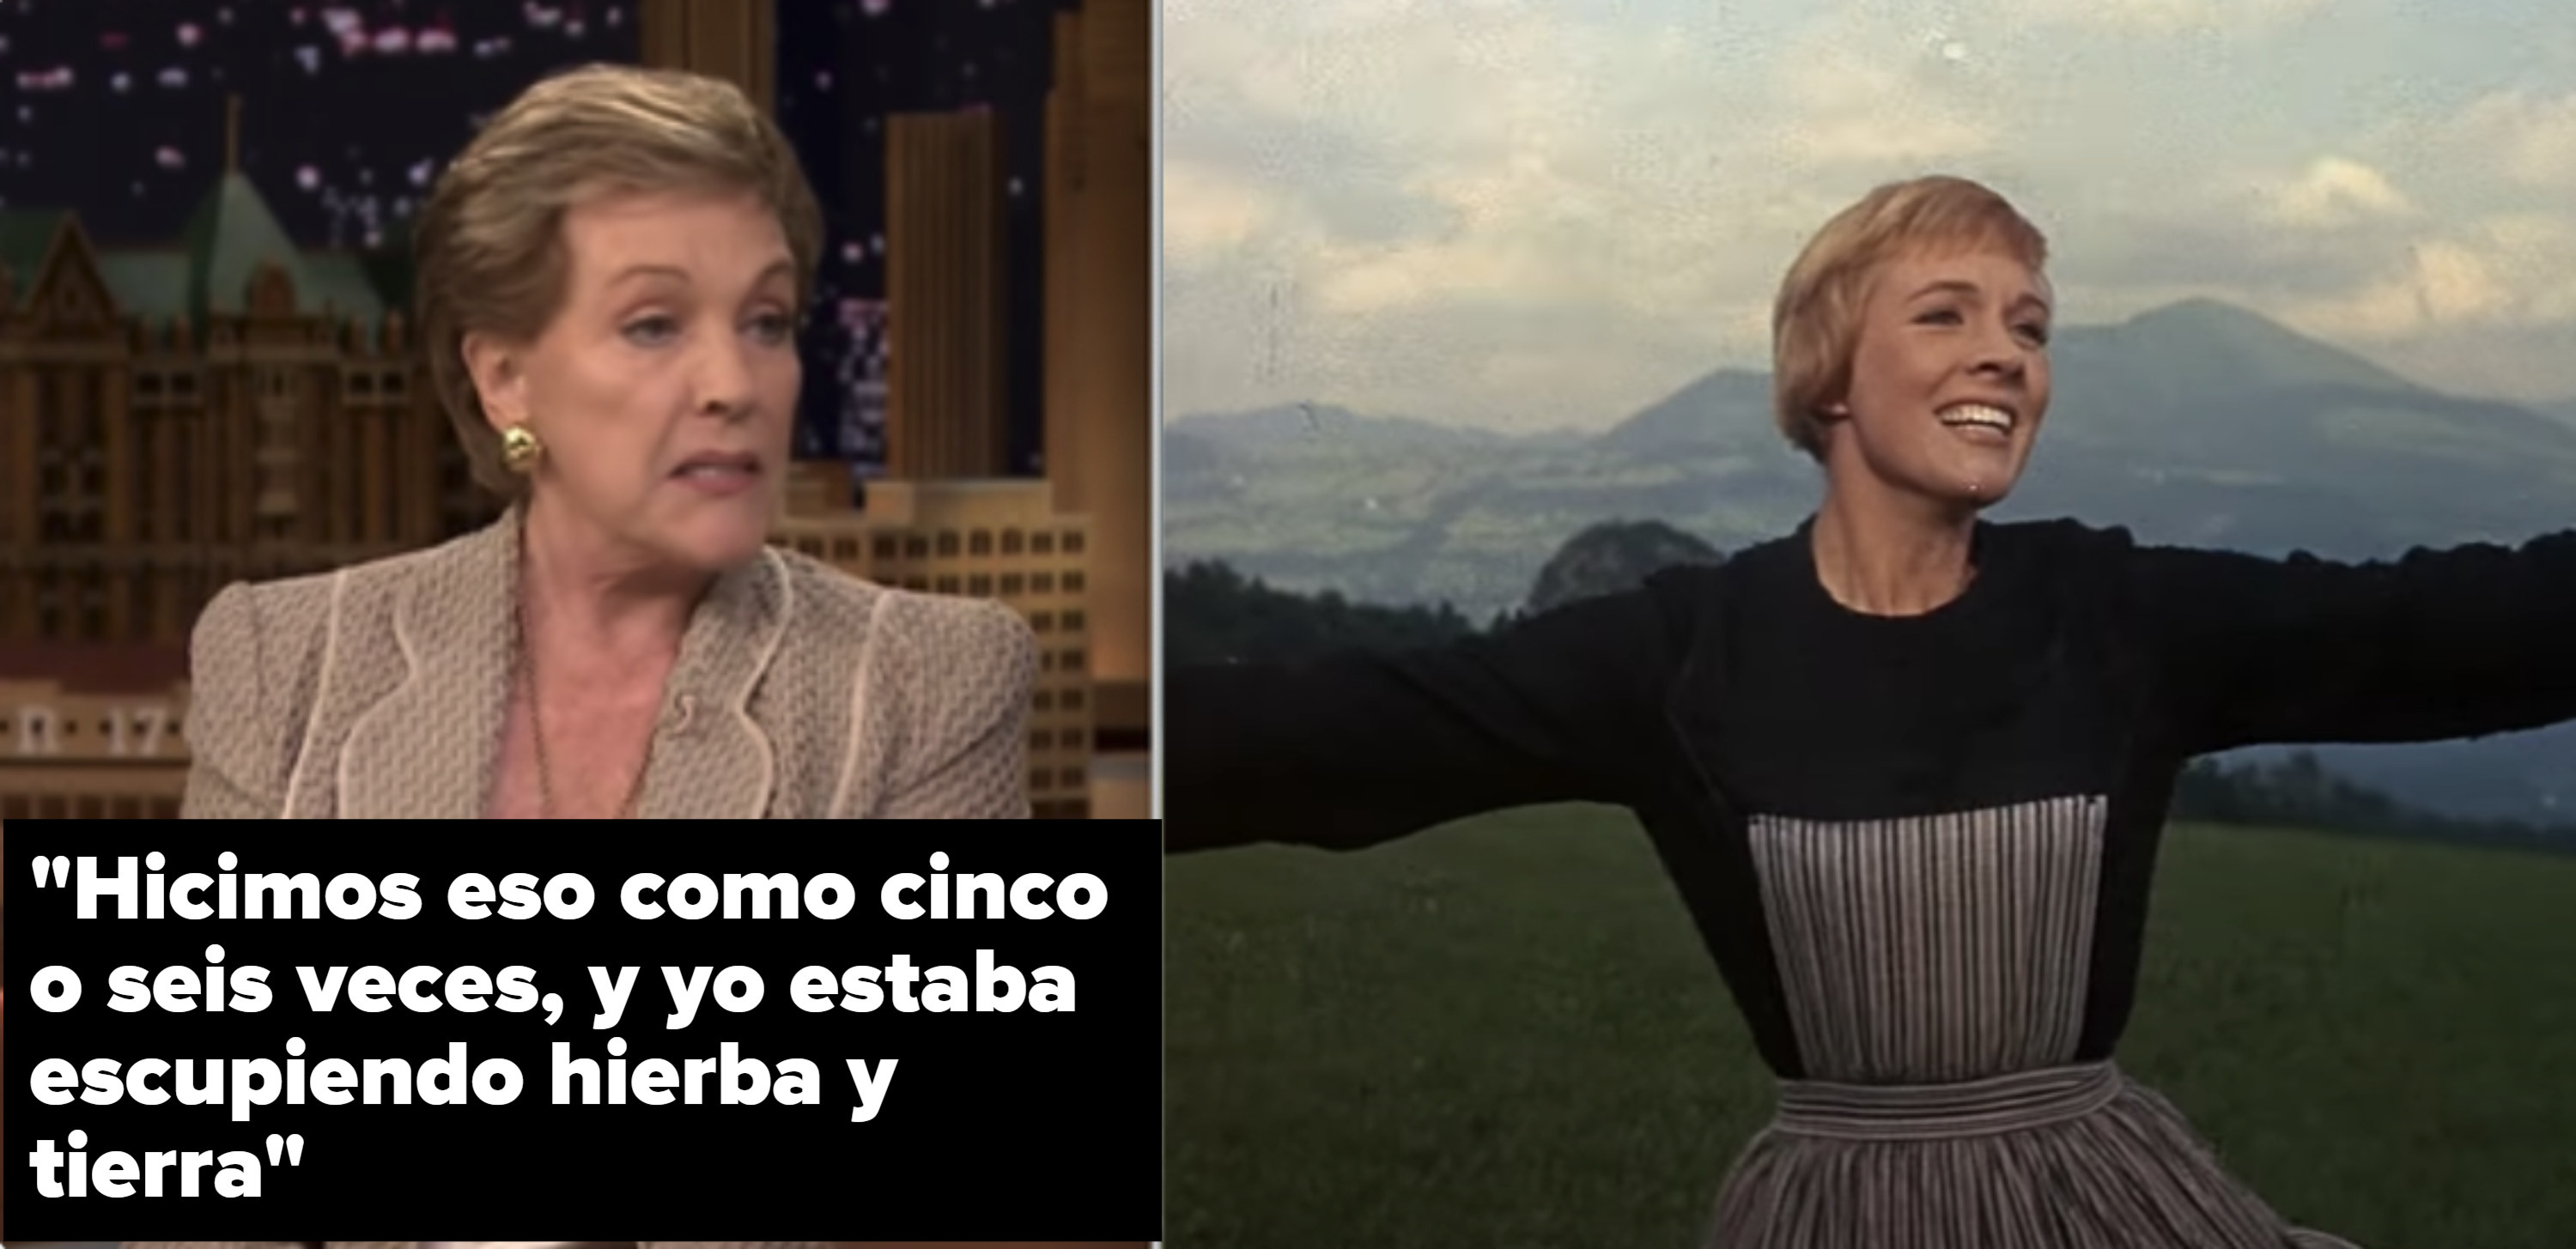 Julie Andrews on &quot;The Tonight Show&quot; talking about the opening shot of &quot;The Sound of Music&quot;